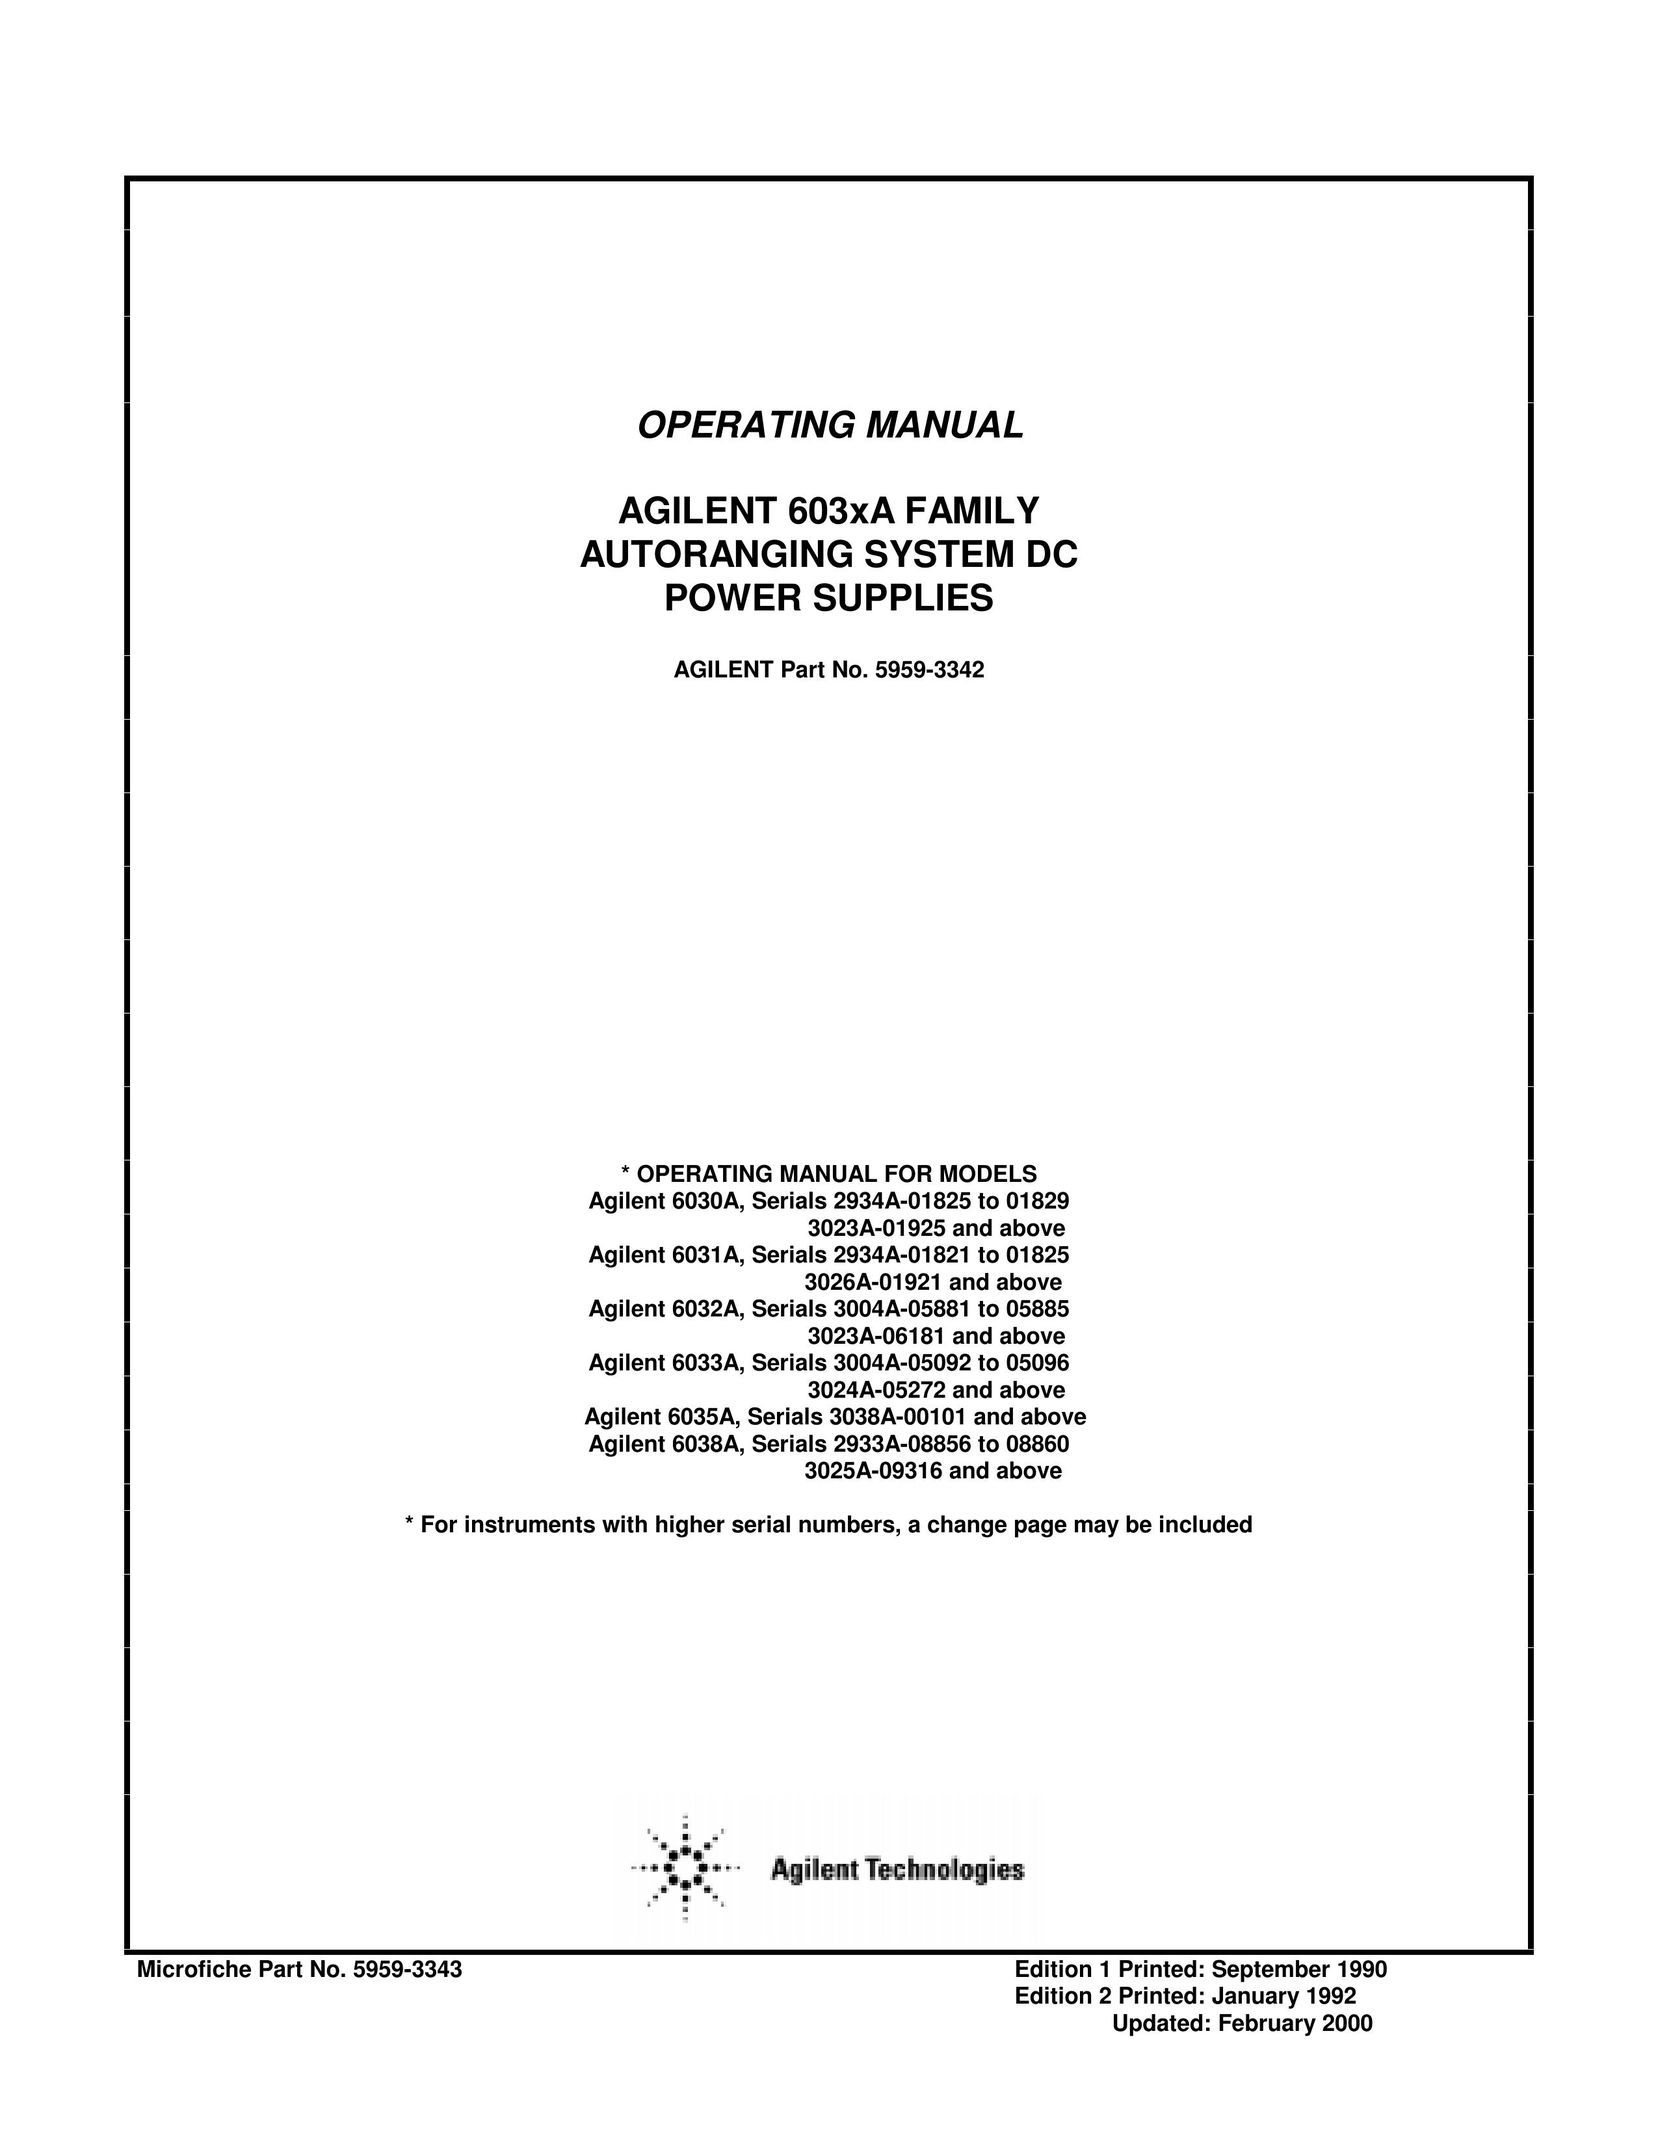 Agilent Technologies Serials 2934A-01821 to 01825 3026A-01921 and above Agilent 6032A Video Gaming Accessories User Manual